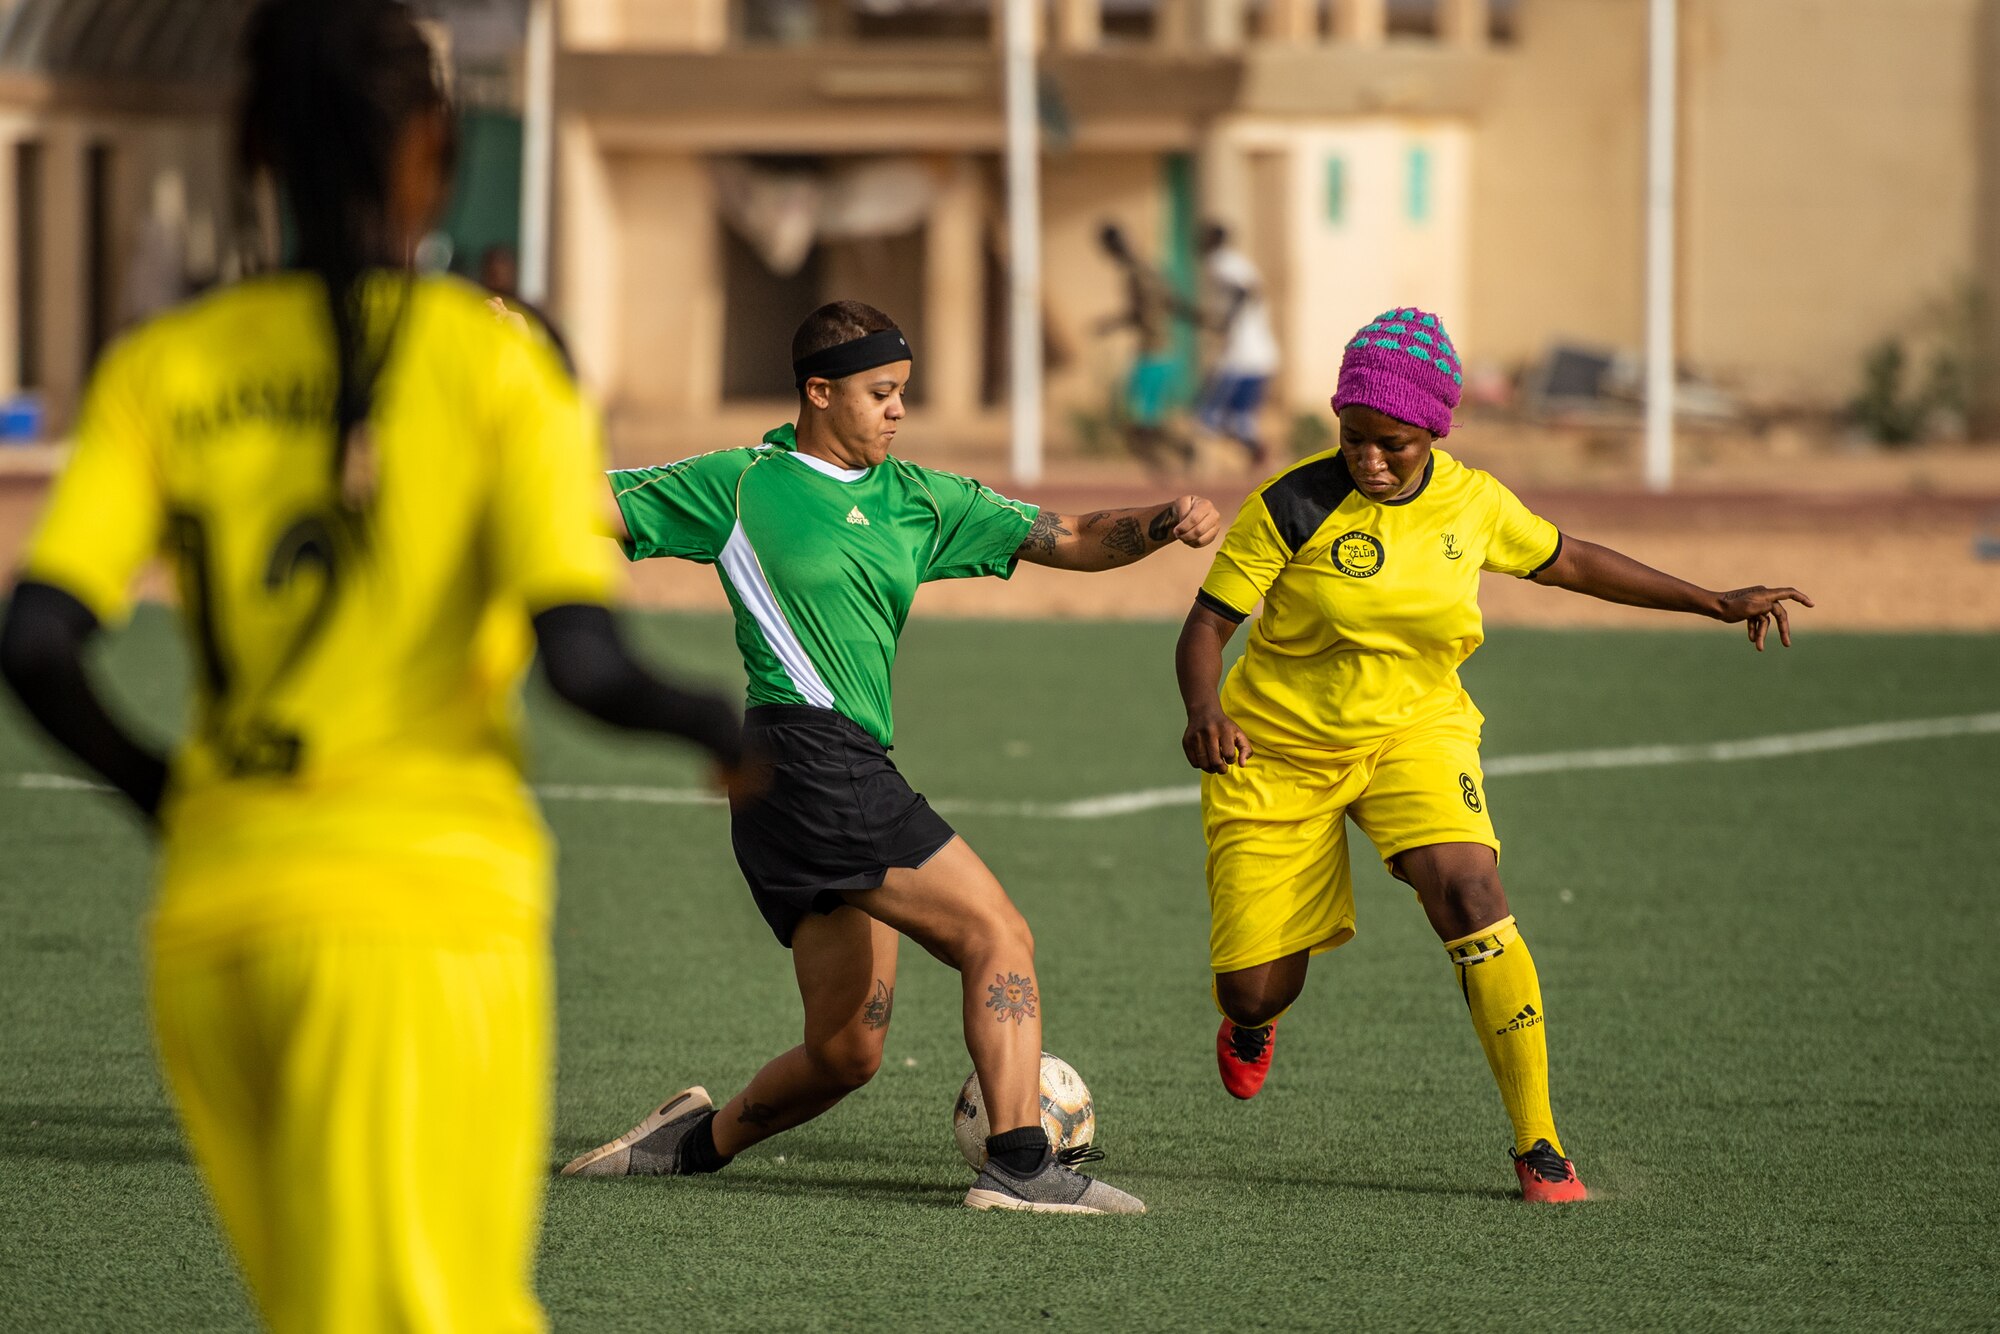 U.S. Air Force Senior Airman Lexis French, 724th Expeditionary Air Base Squadron services flight member, dribbles a soccer ball down a field during a recreational game between Nigerien Air Base 201 and the Nassara Athletic Club Women’s Soccer Team at the Agadez Sports Stadium in Agadez, Niger, July 5, 2019. The civil affairs team held the game to build rapport and promote positive sentiment between the local community and AB 201 personnel. (U.S. Air Force photo by Staff Sgt. Devin Boyer)